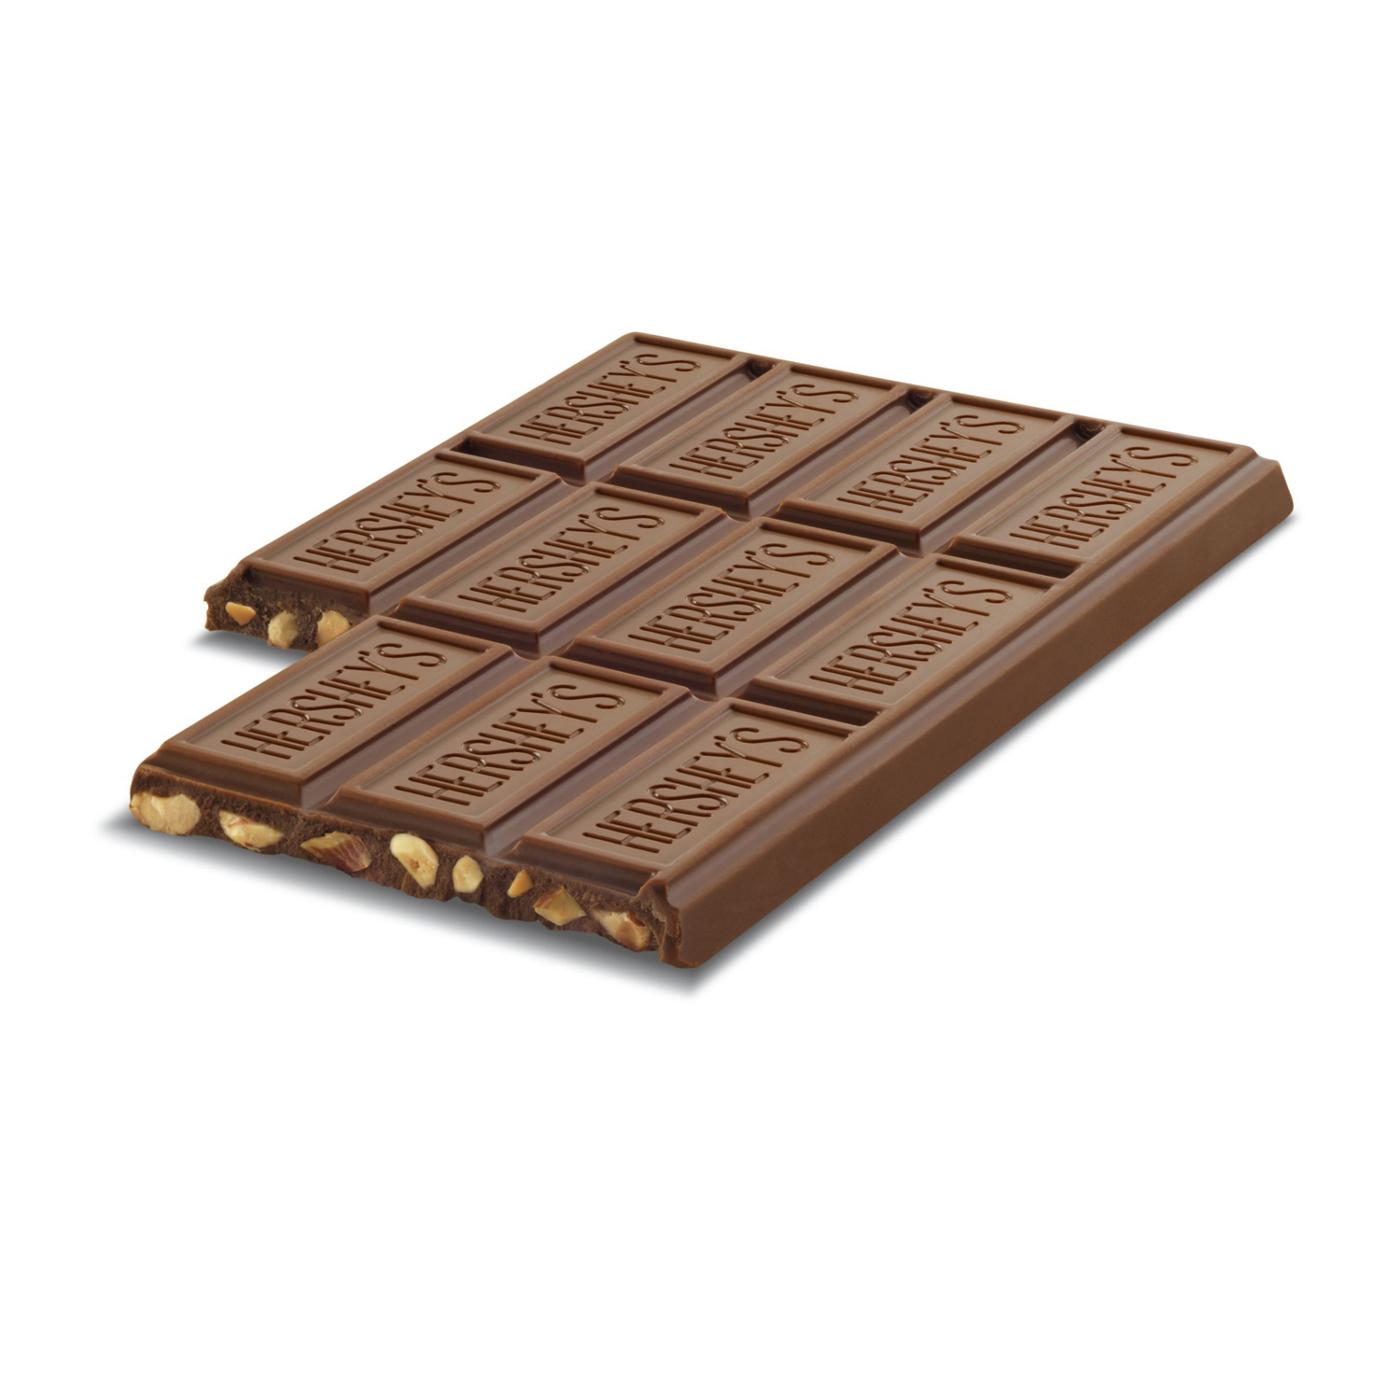 Hershey's Milk Chocolate with Almonds Giant Candy Bar; image 3 of 10